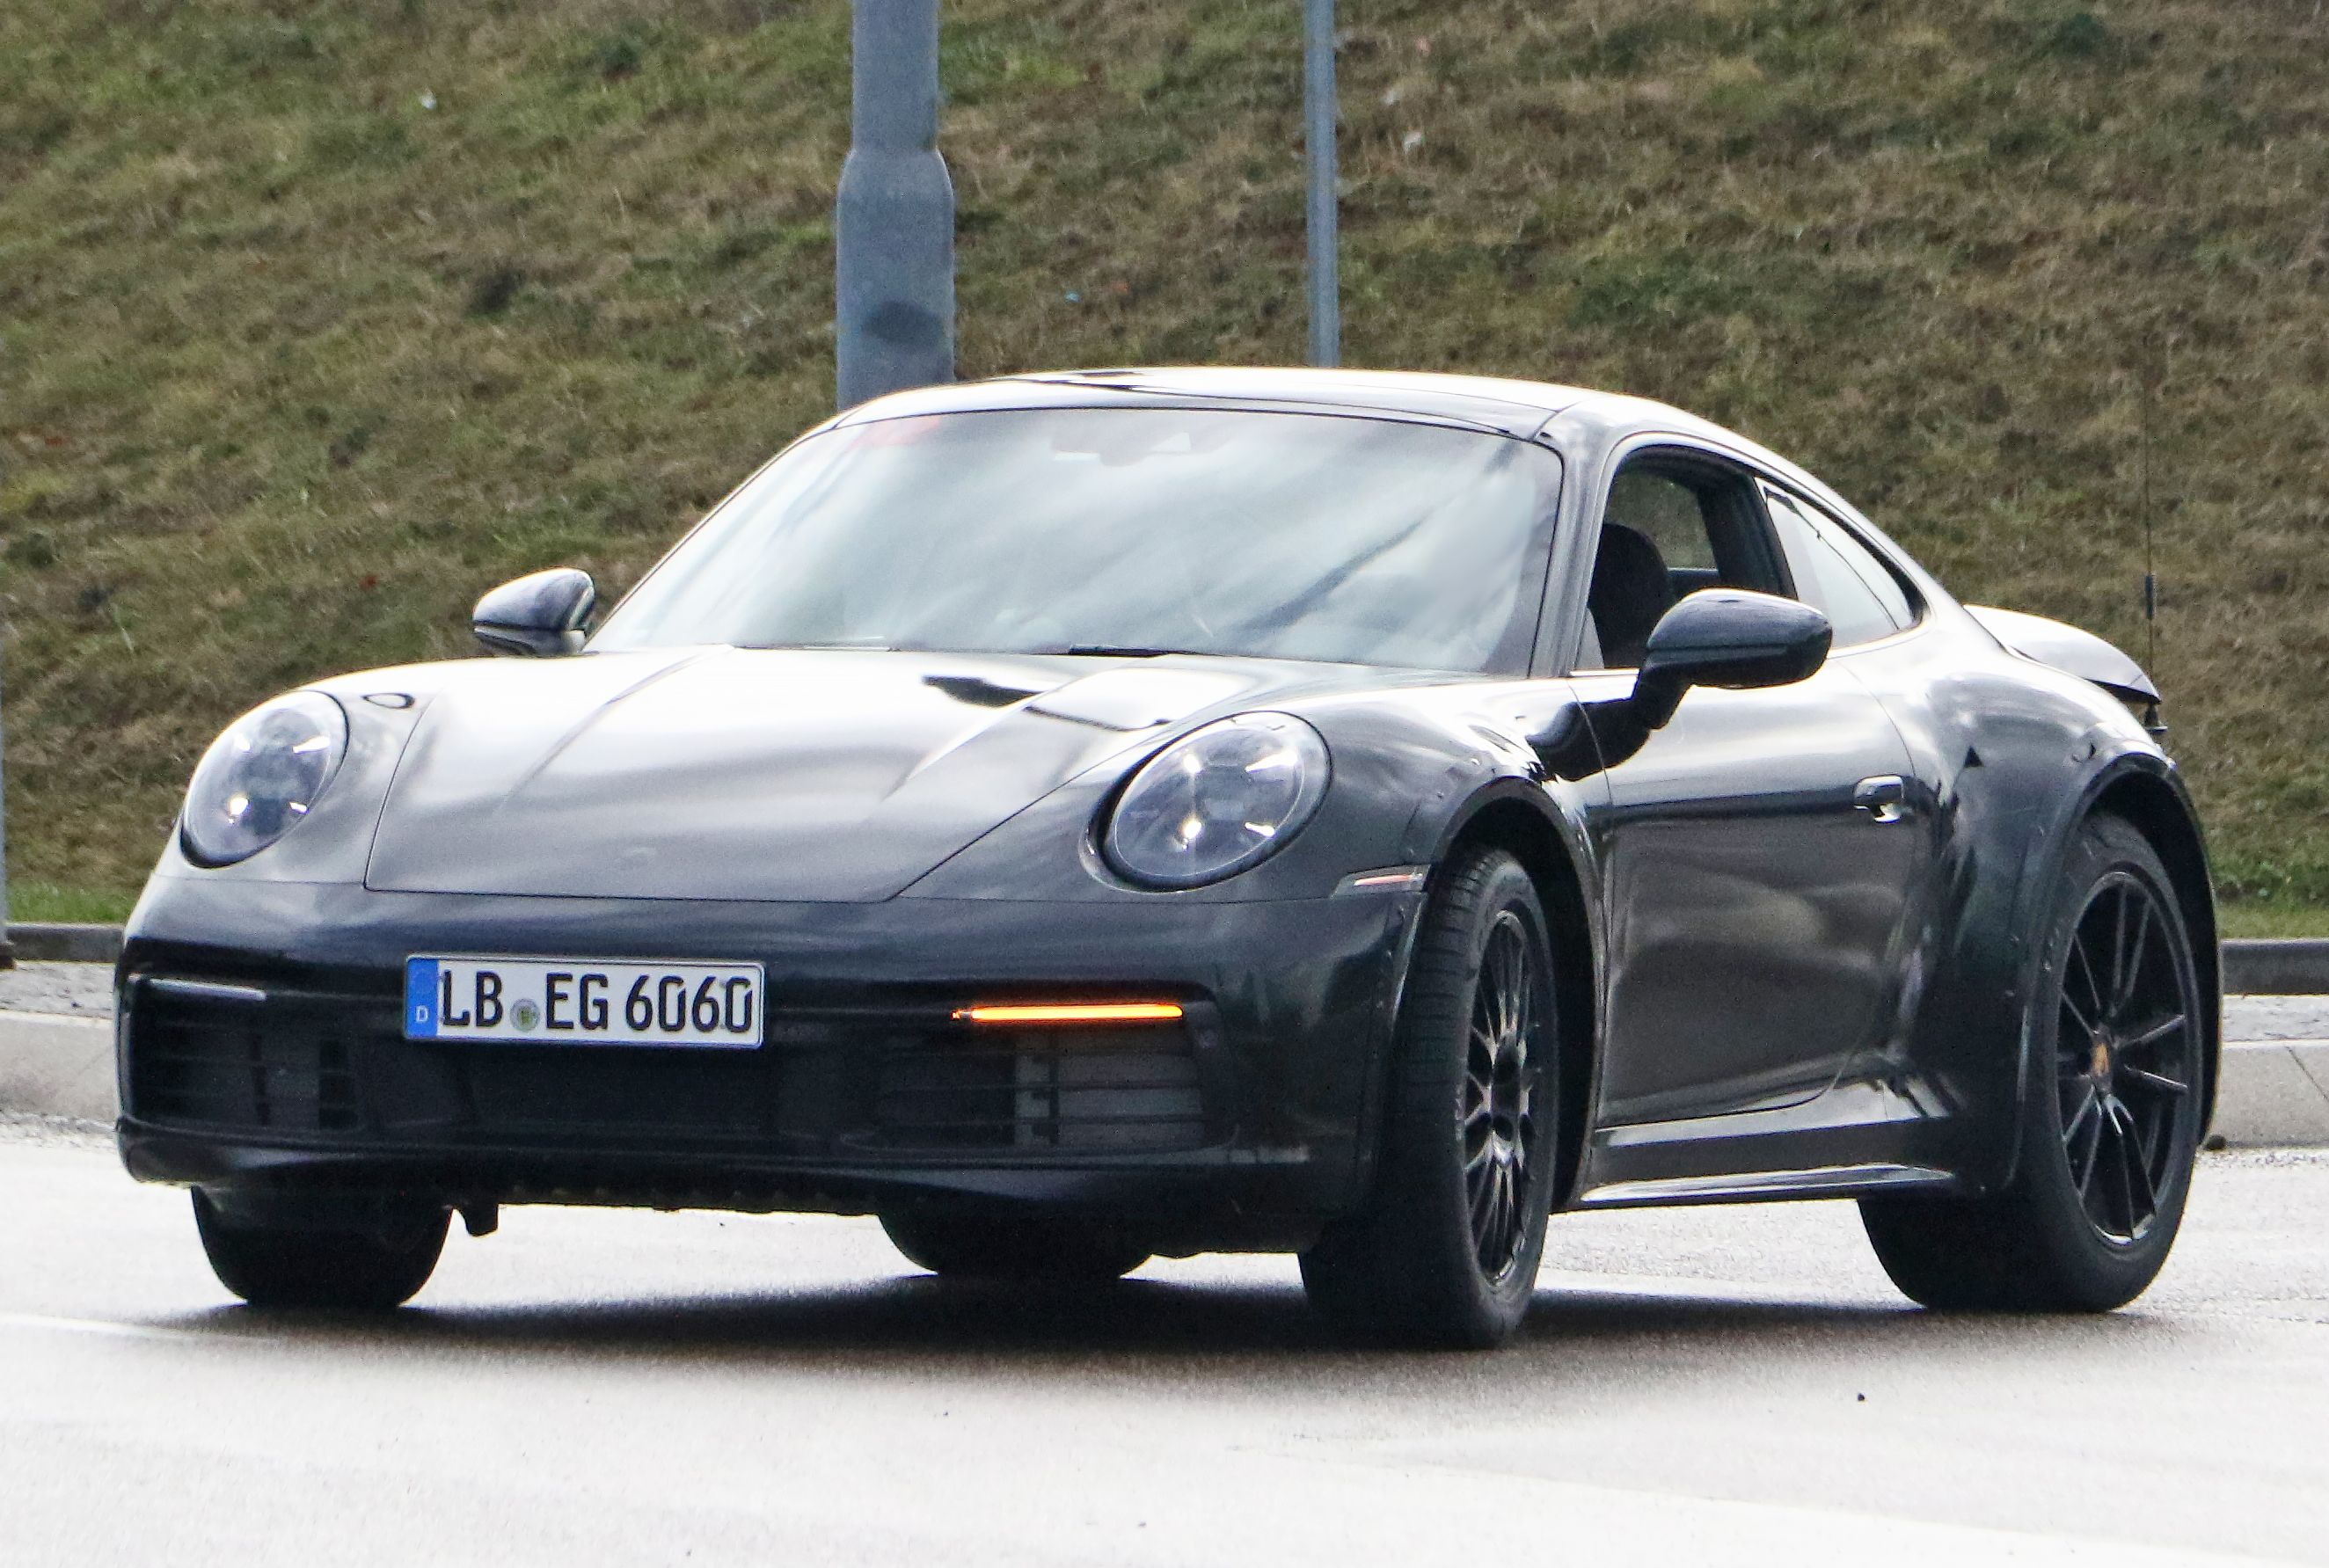 2021 It Looks Like Porsche Really Is Working On a New 911 Safari!